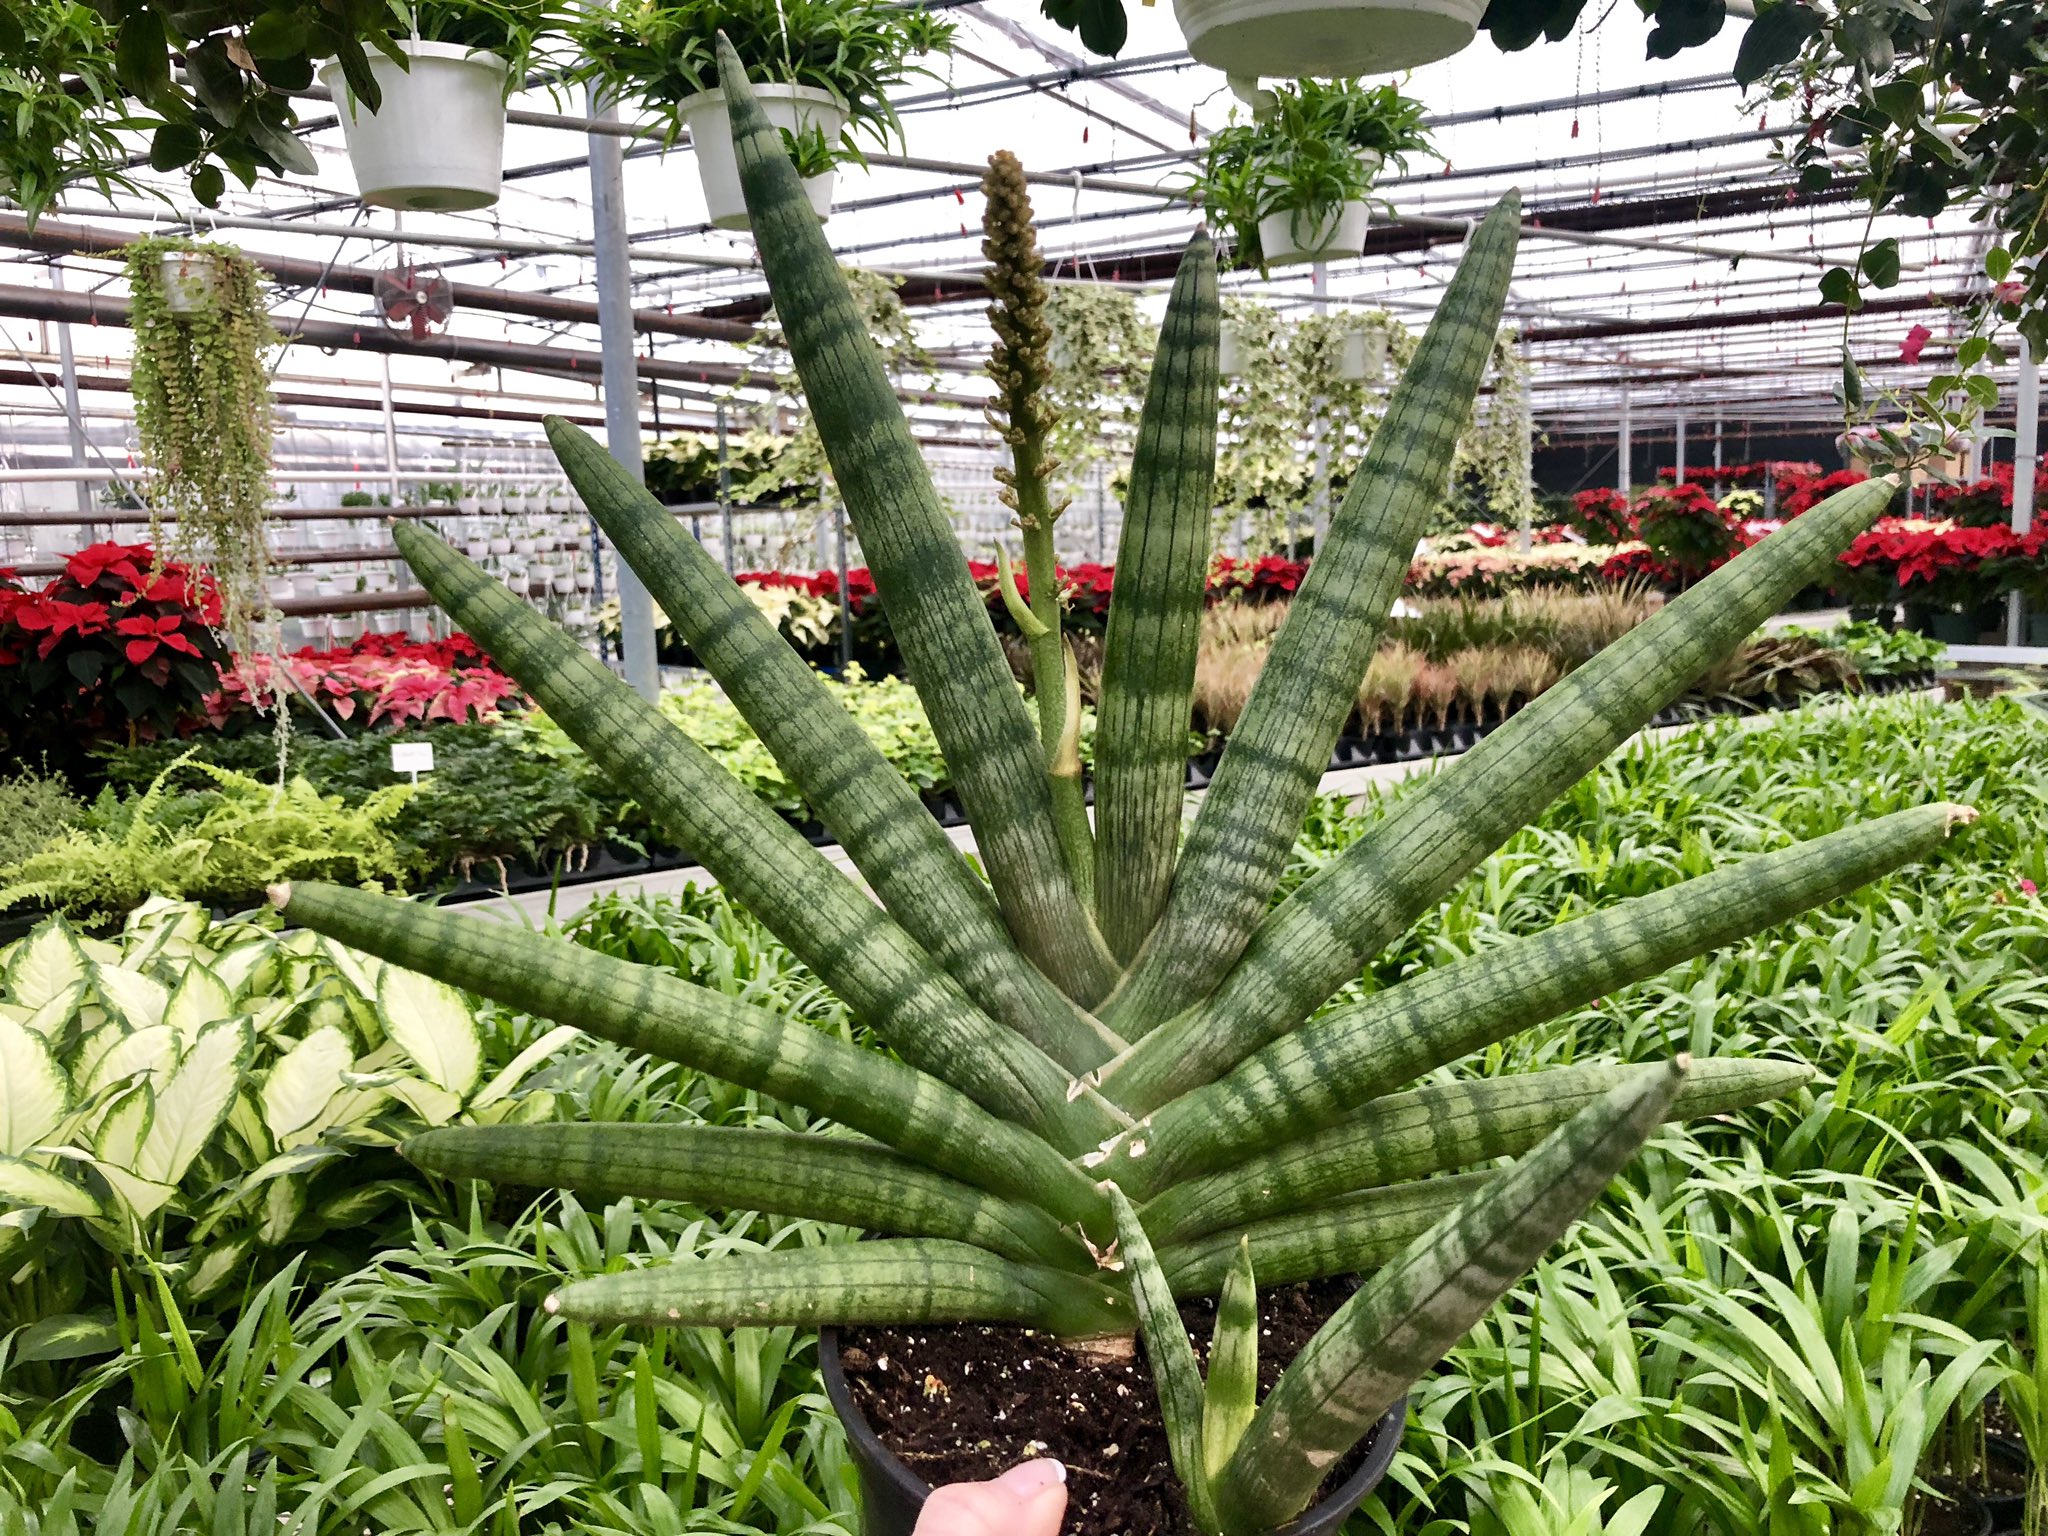 Valleyview Gardens On Twitter Look What S Blooming The Sansevieria Cylindrica Starfish Will Definitely Be A Conversation Piece Among Your Plant Family Happy Sansevieriasunday Sansevieria Sansevieriacylindrica Sansevieriastarfish